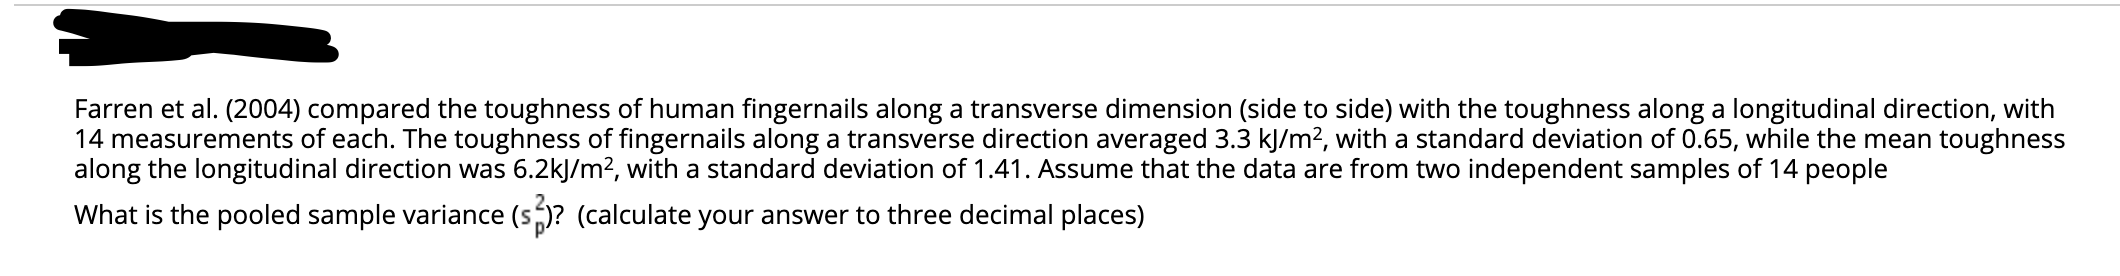 Farren et al. (2004) compared the toughness of human fingernails along a transverse dimension (side to side) with the toughness along a longitudinal direction, with
14 measurements of each. The toughness of fingernails along a transverse direction averaged 3.3 kJ/m2, with a standard deviation of 0.65, while the mean toughness
along the longitudinal direction was 6.2kJ/m², with a standard deviation of 1.41. Assume that the data are from two independent samples of 14 people
What is the pooled sample variance (s)? (calculate your answer to three decimal places)
